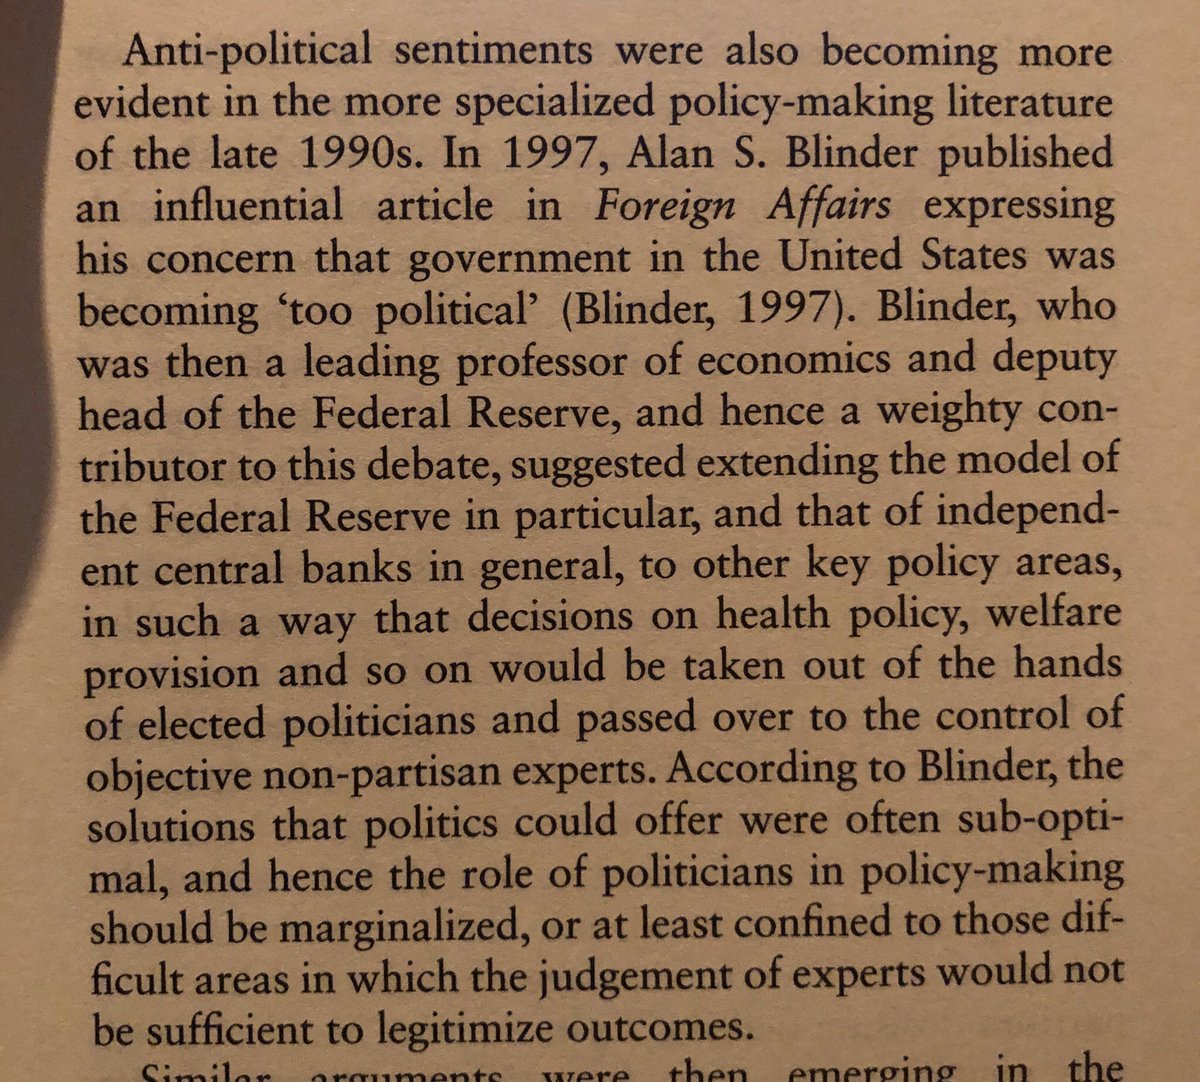 Anti-politics of the 1990s - not populism, but taking important decisions “out of the hands of politicians and passing them into the control of non-partisan, objective experts”. Oh how we laughed